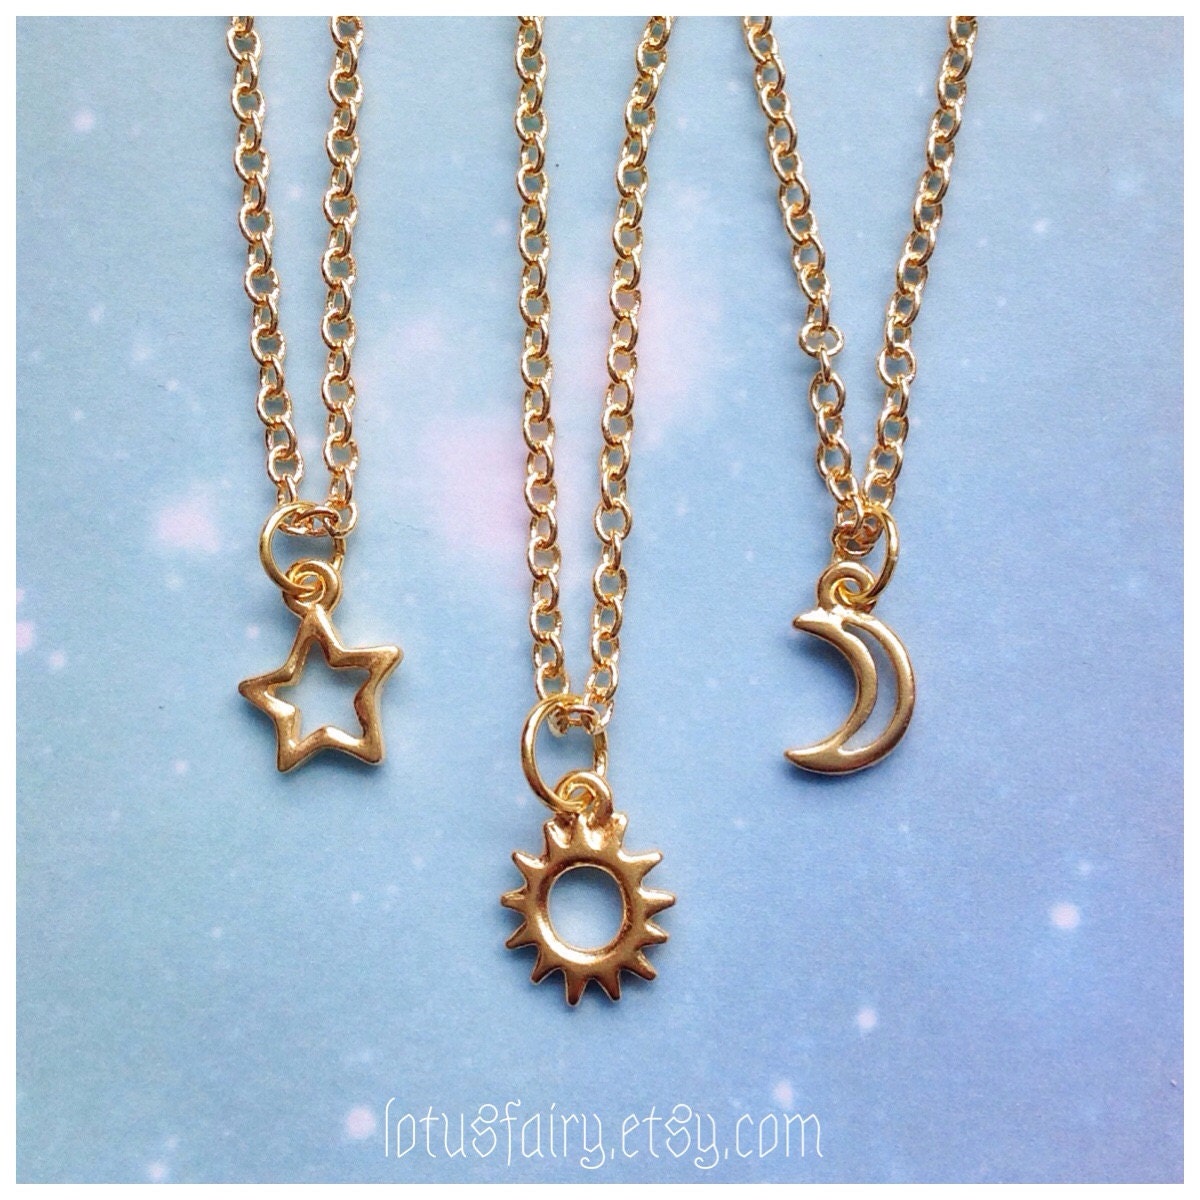 Dainty Gold Sun Moon or Star necklace friendship by lotusfairy